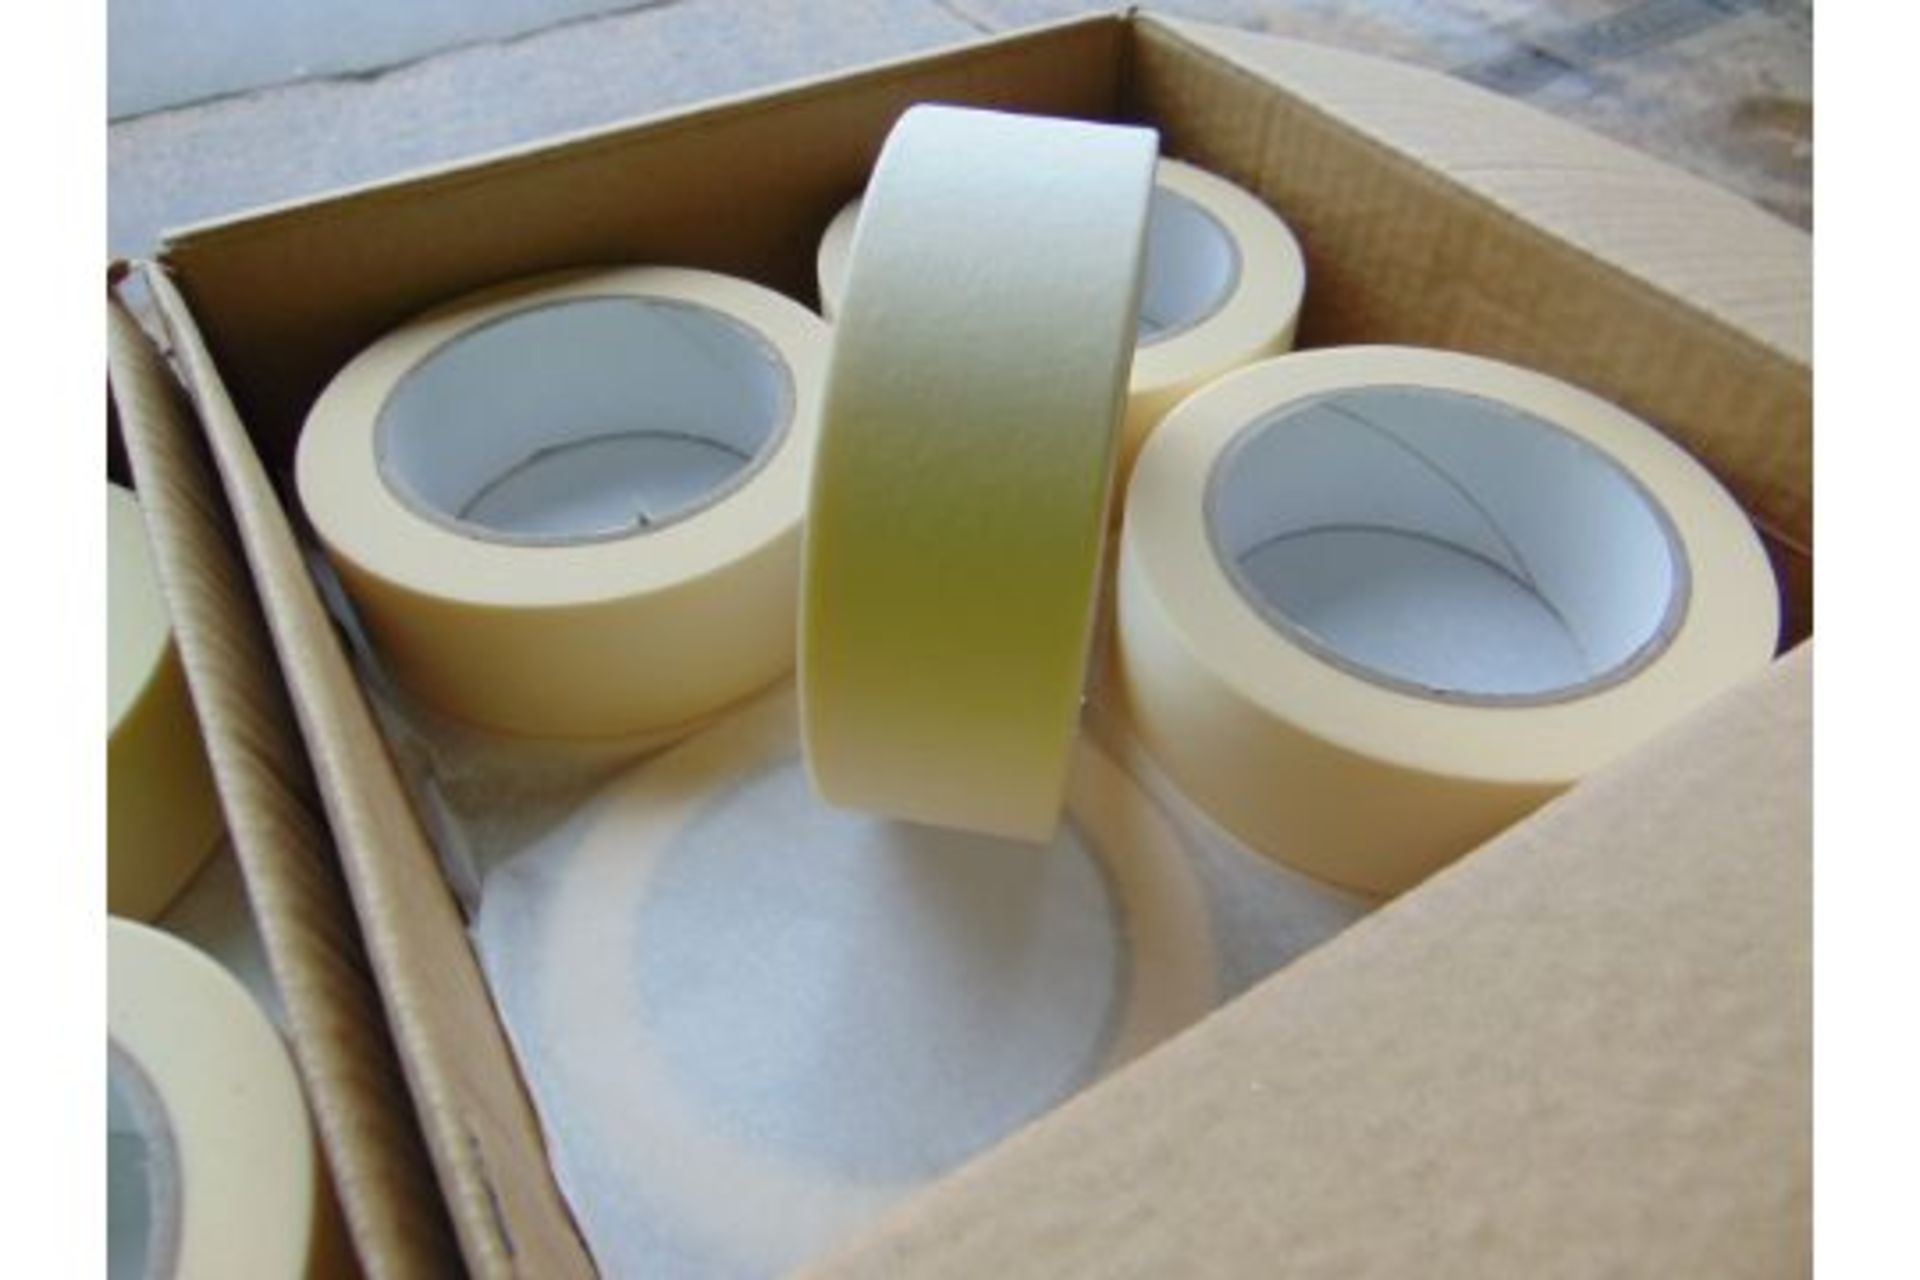 48 Rolls of Masking Tape - 36mm x 50m New from UK MOD - Image 5 of 6